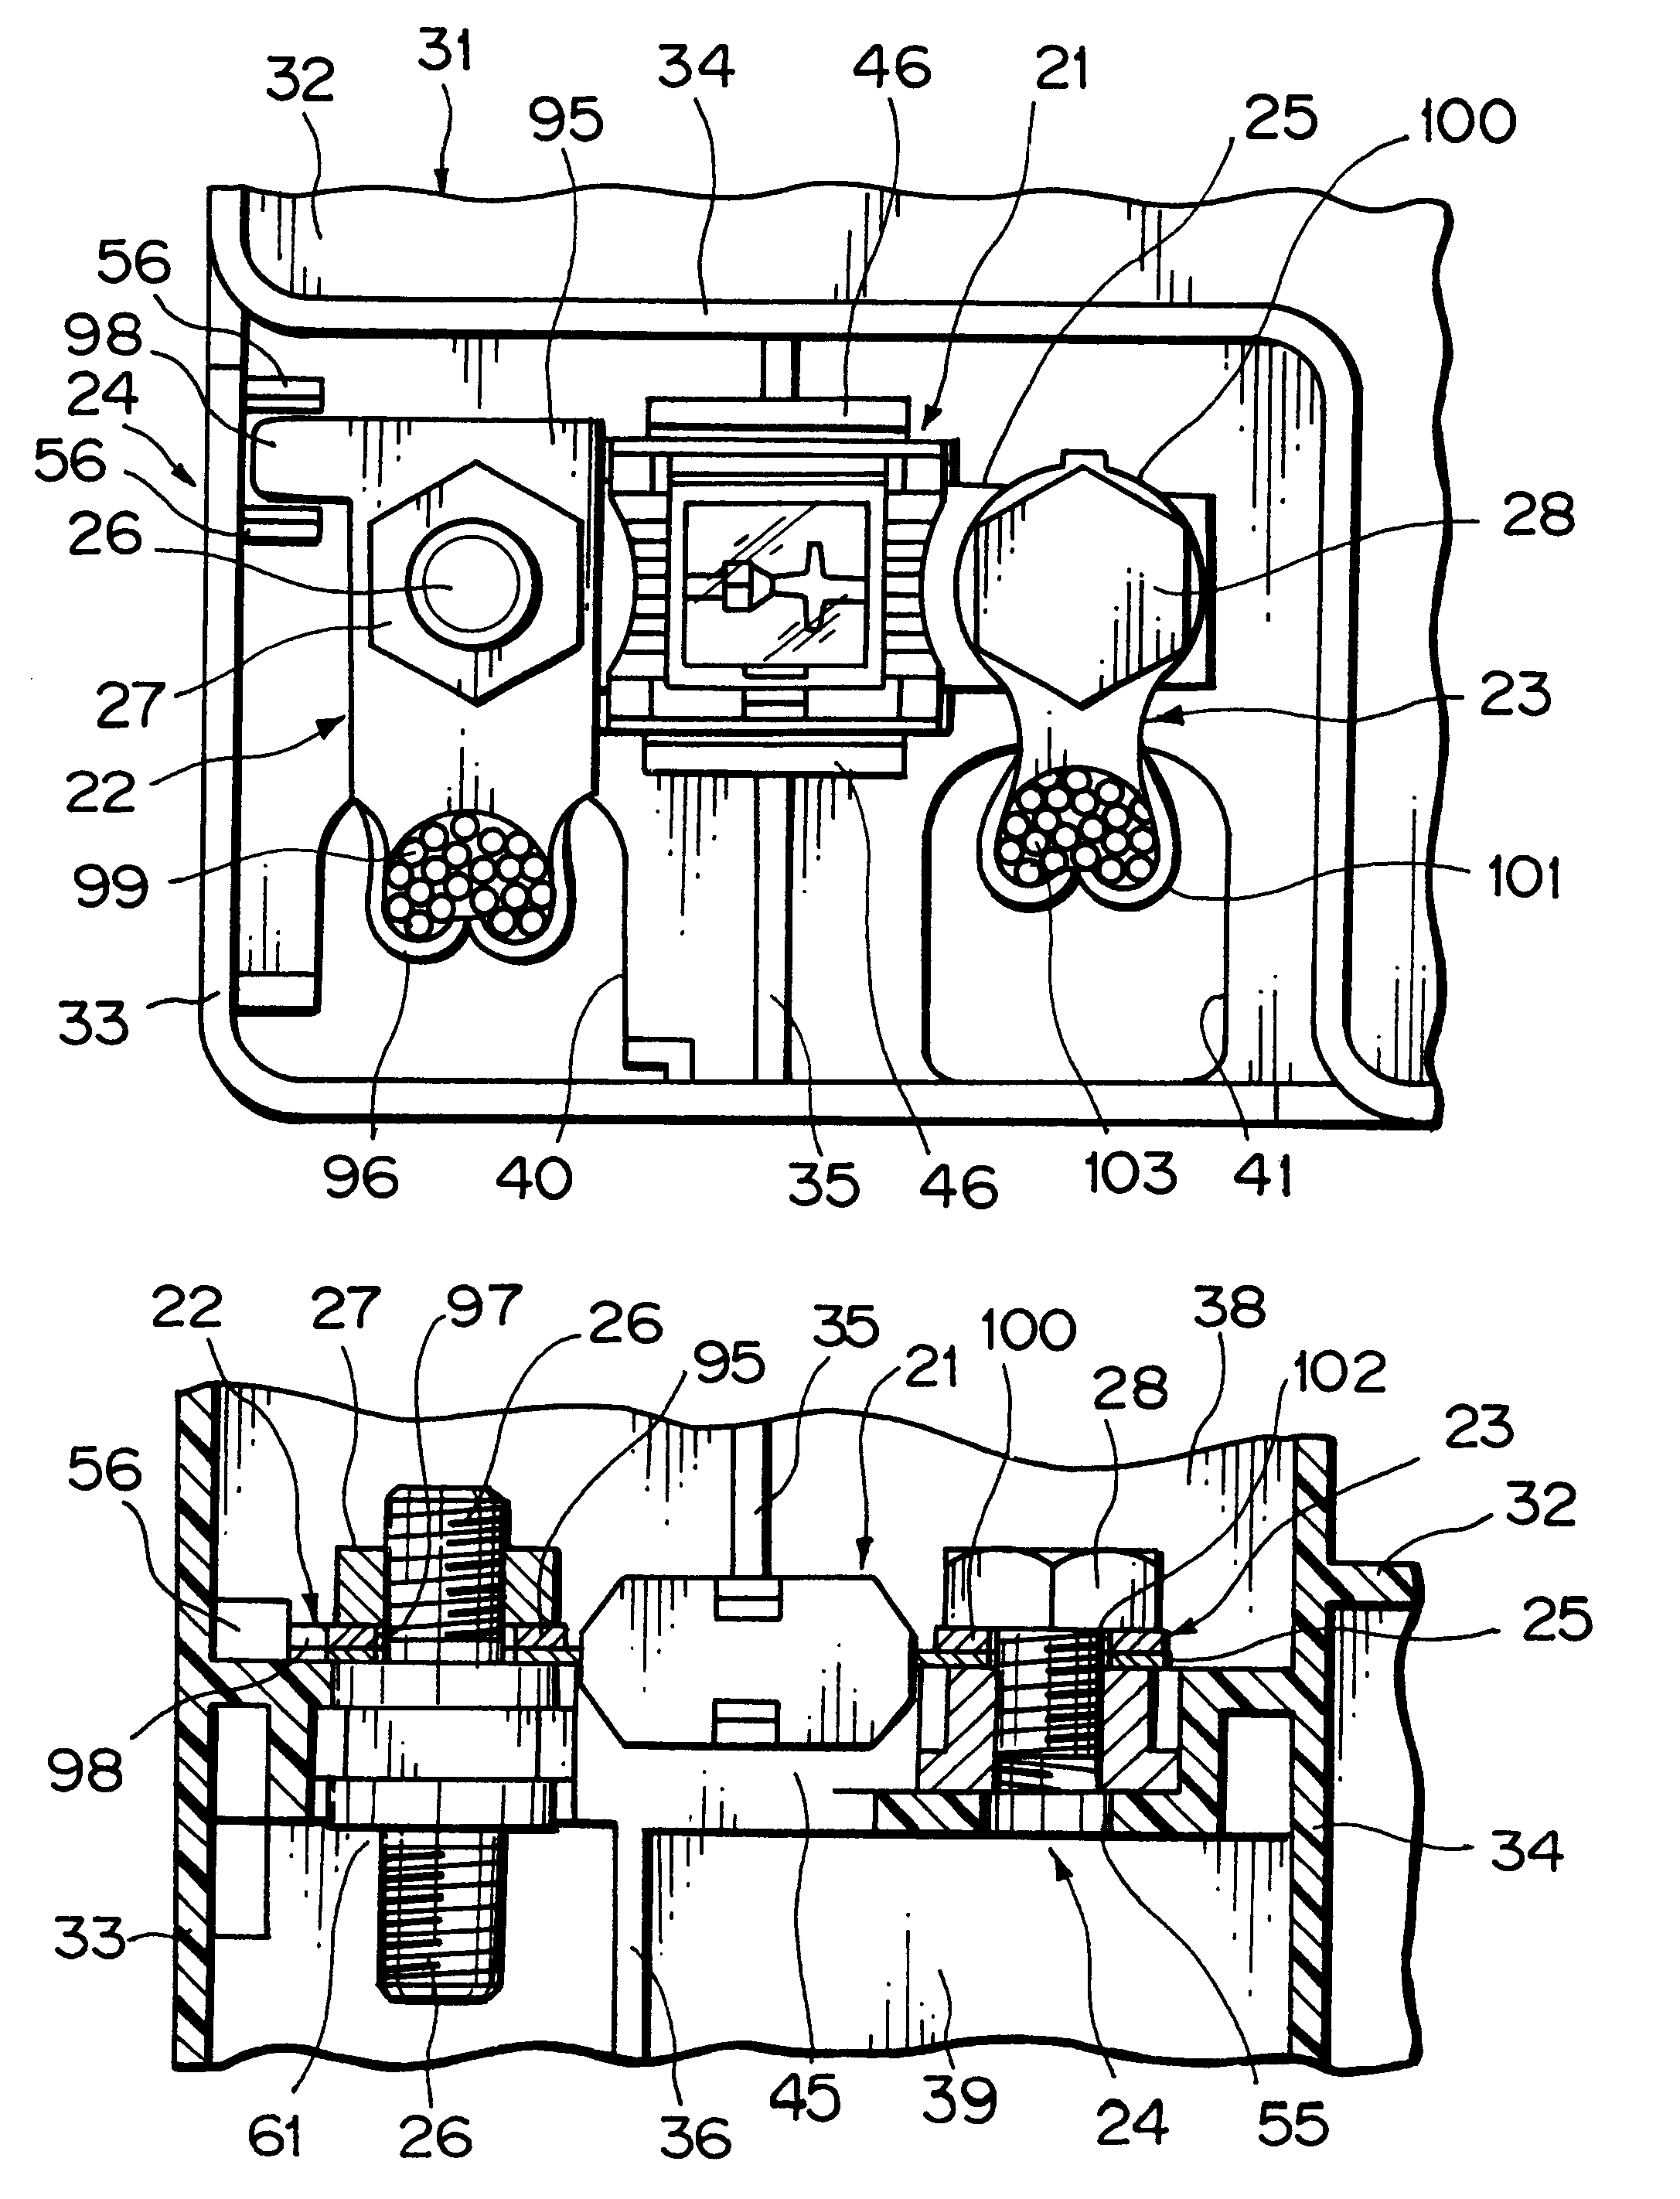 Connecting structure of a fuse link and external terminals